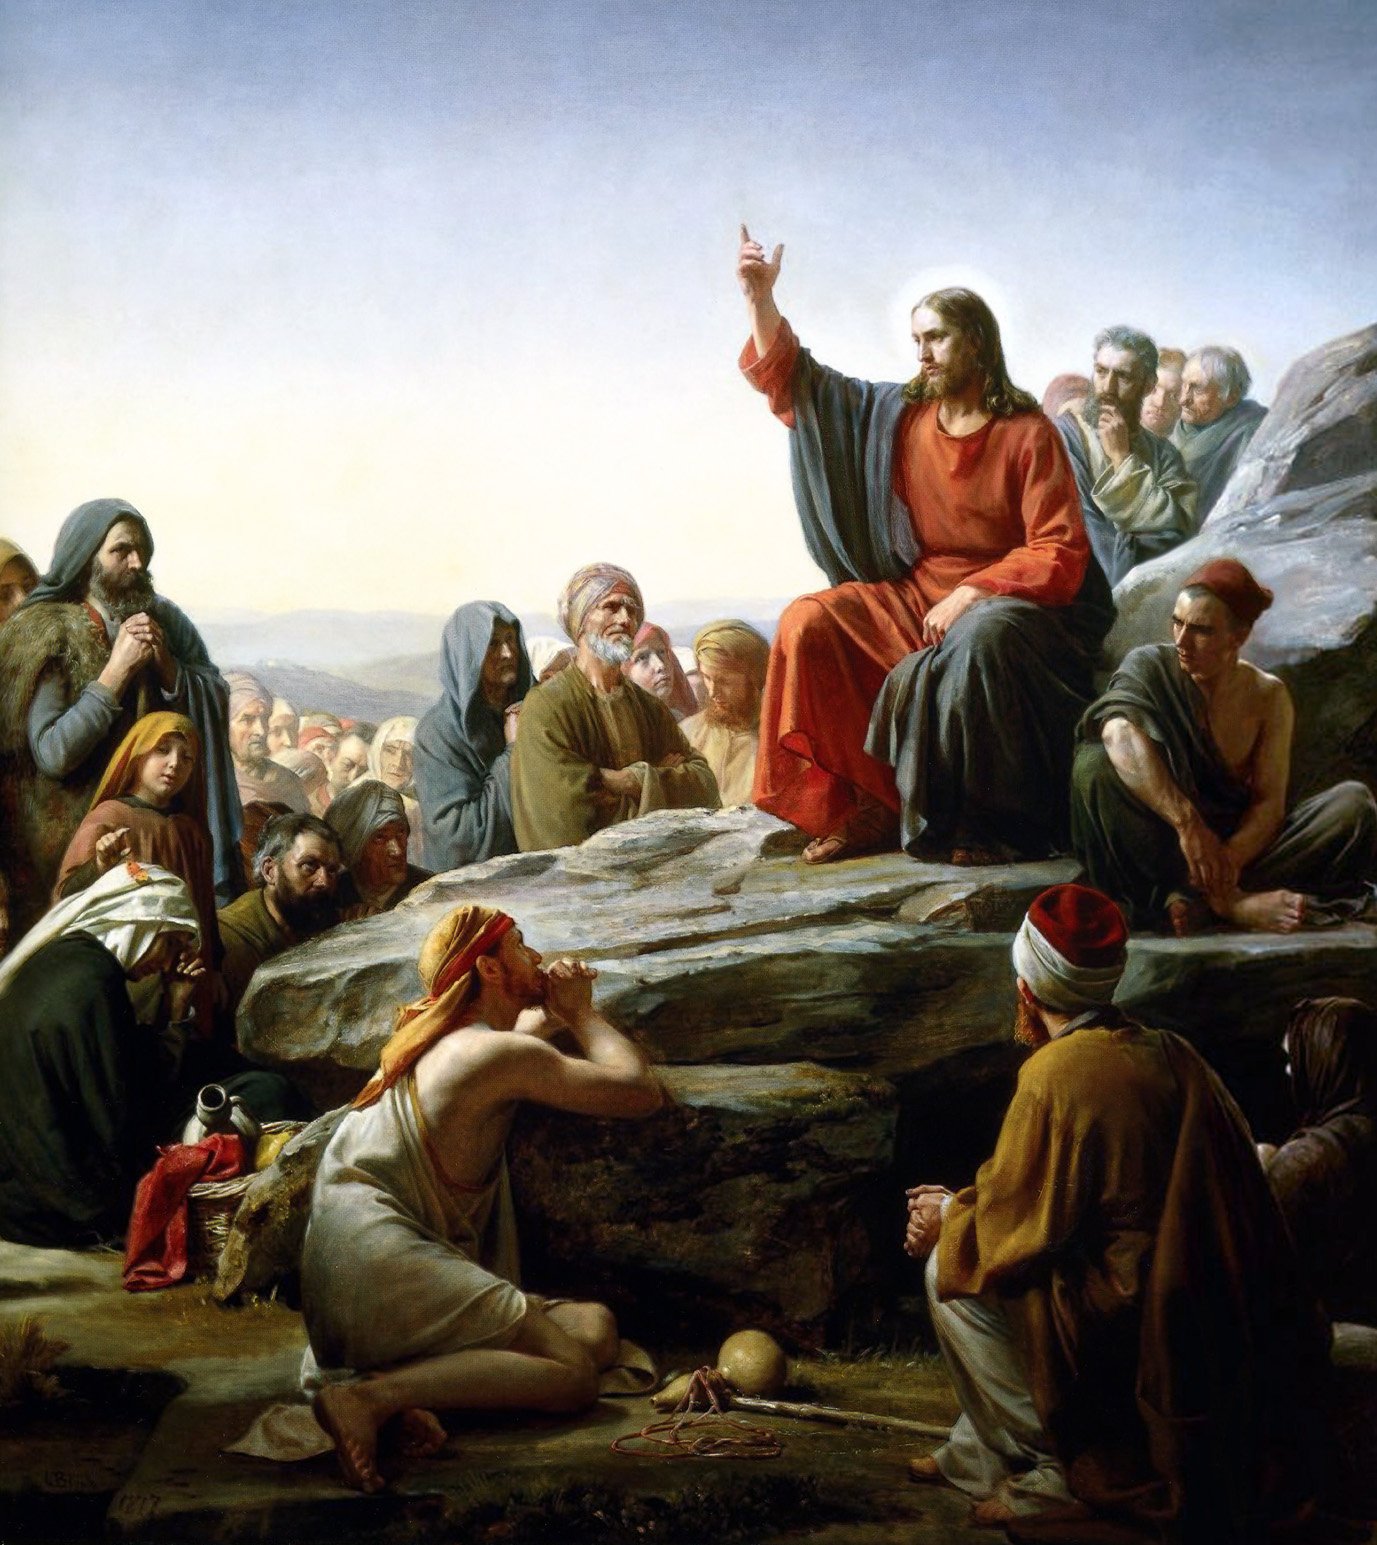 The Sermon on the Mount (1877), by Carl Heinrich Bloch